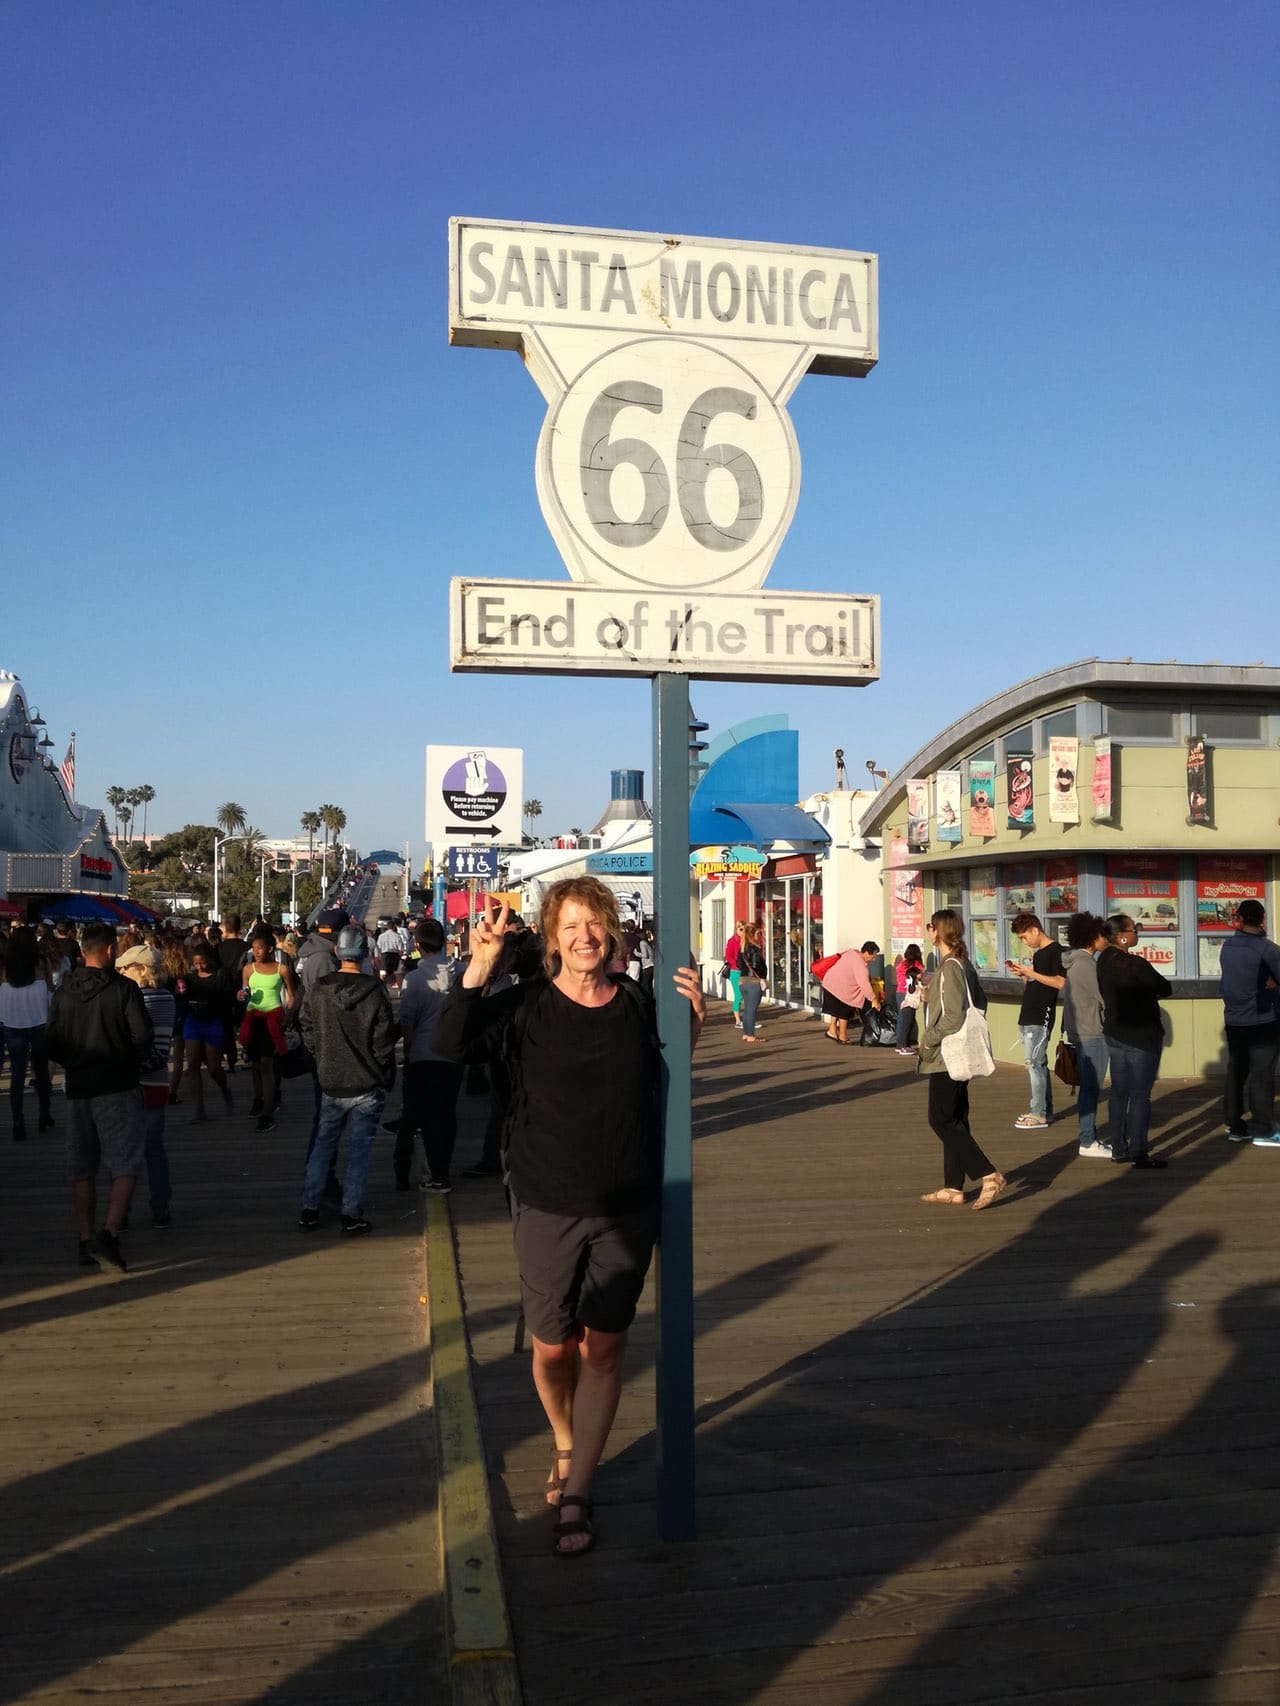 End of the Trail Route 66 in Santa Monica